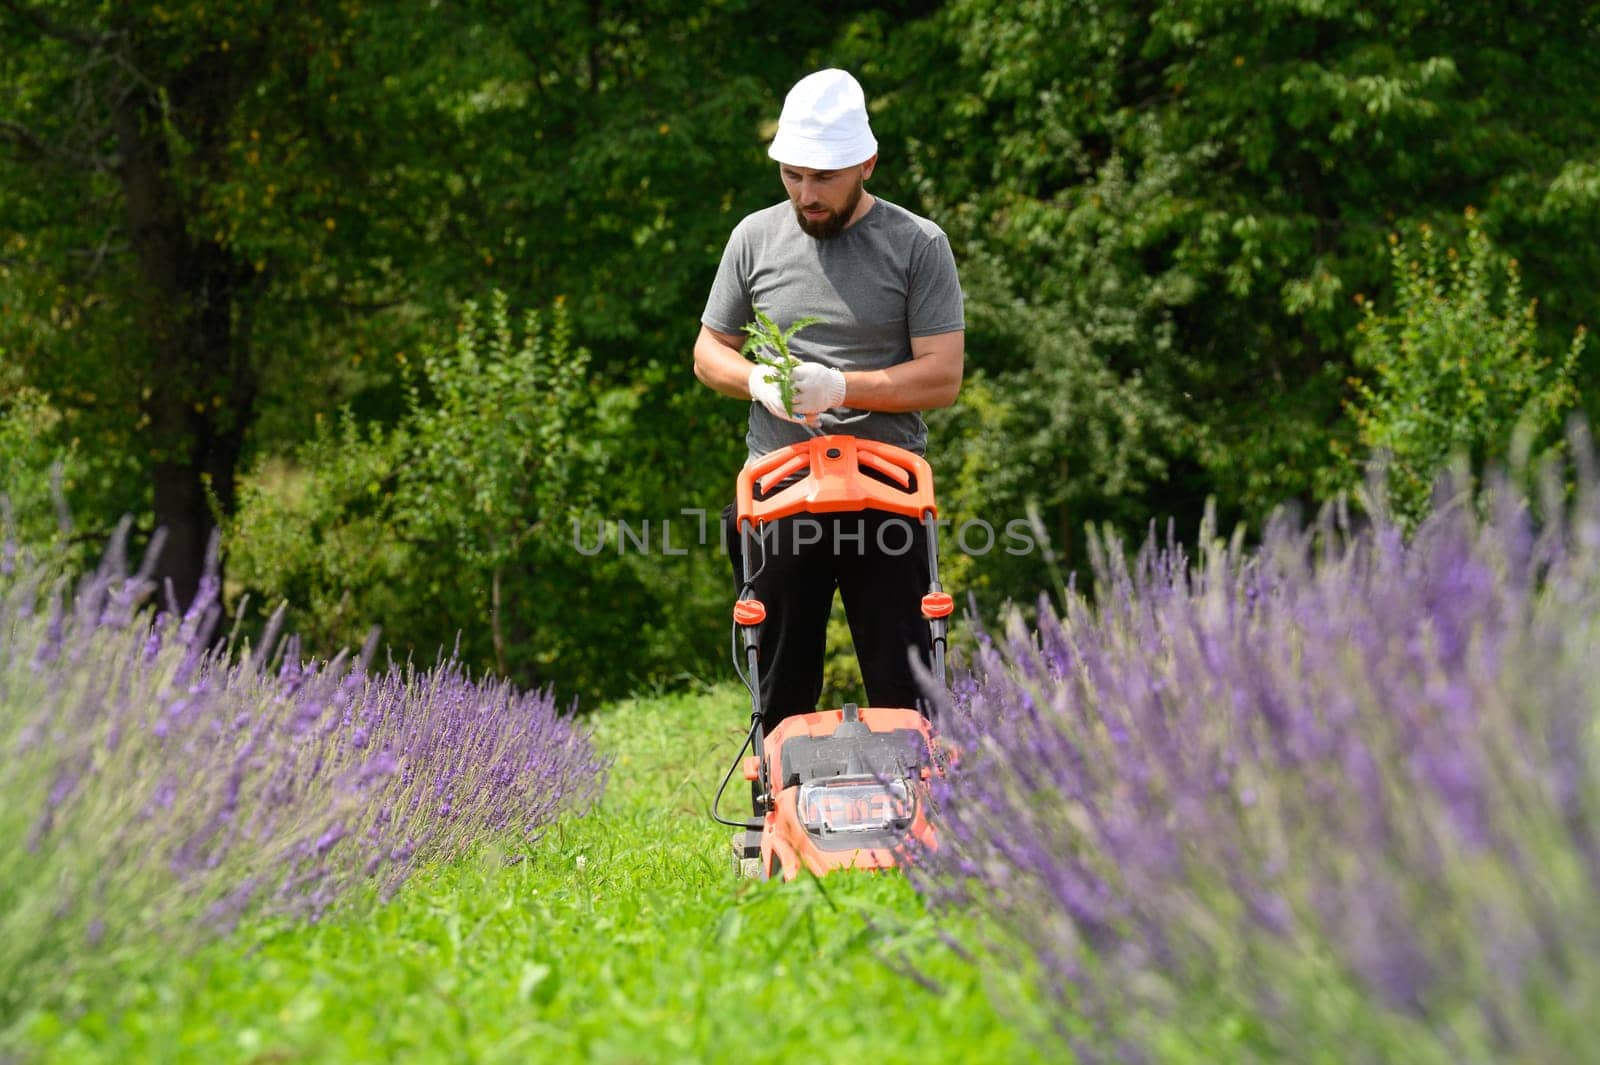 Mowing the grass in the lavender field with an electric lawnmower by Niko_Cingaryuk